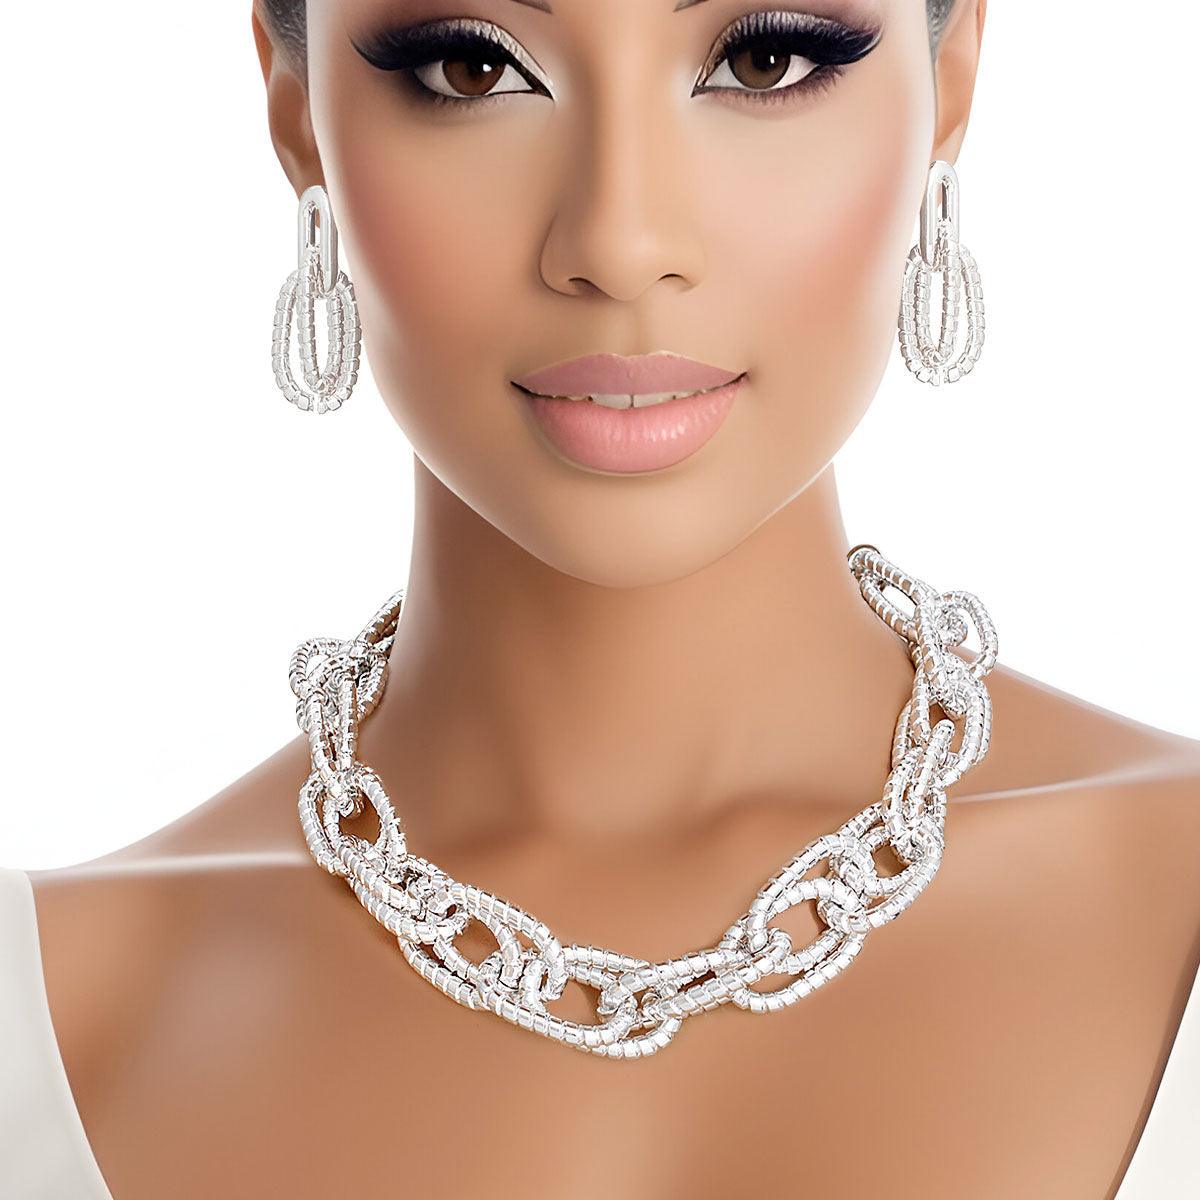 Chic Shiny Silver Oval Link Chain Necklace & Earrings Set - Fashion Jewelry